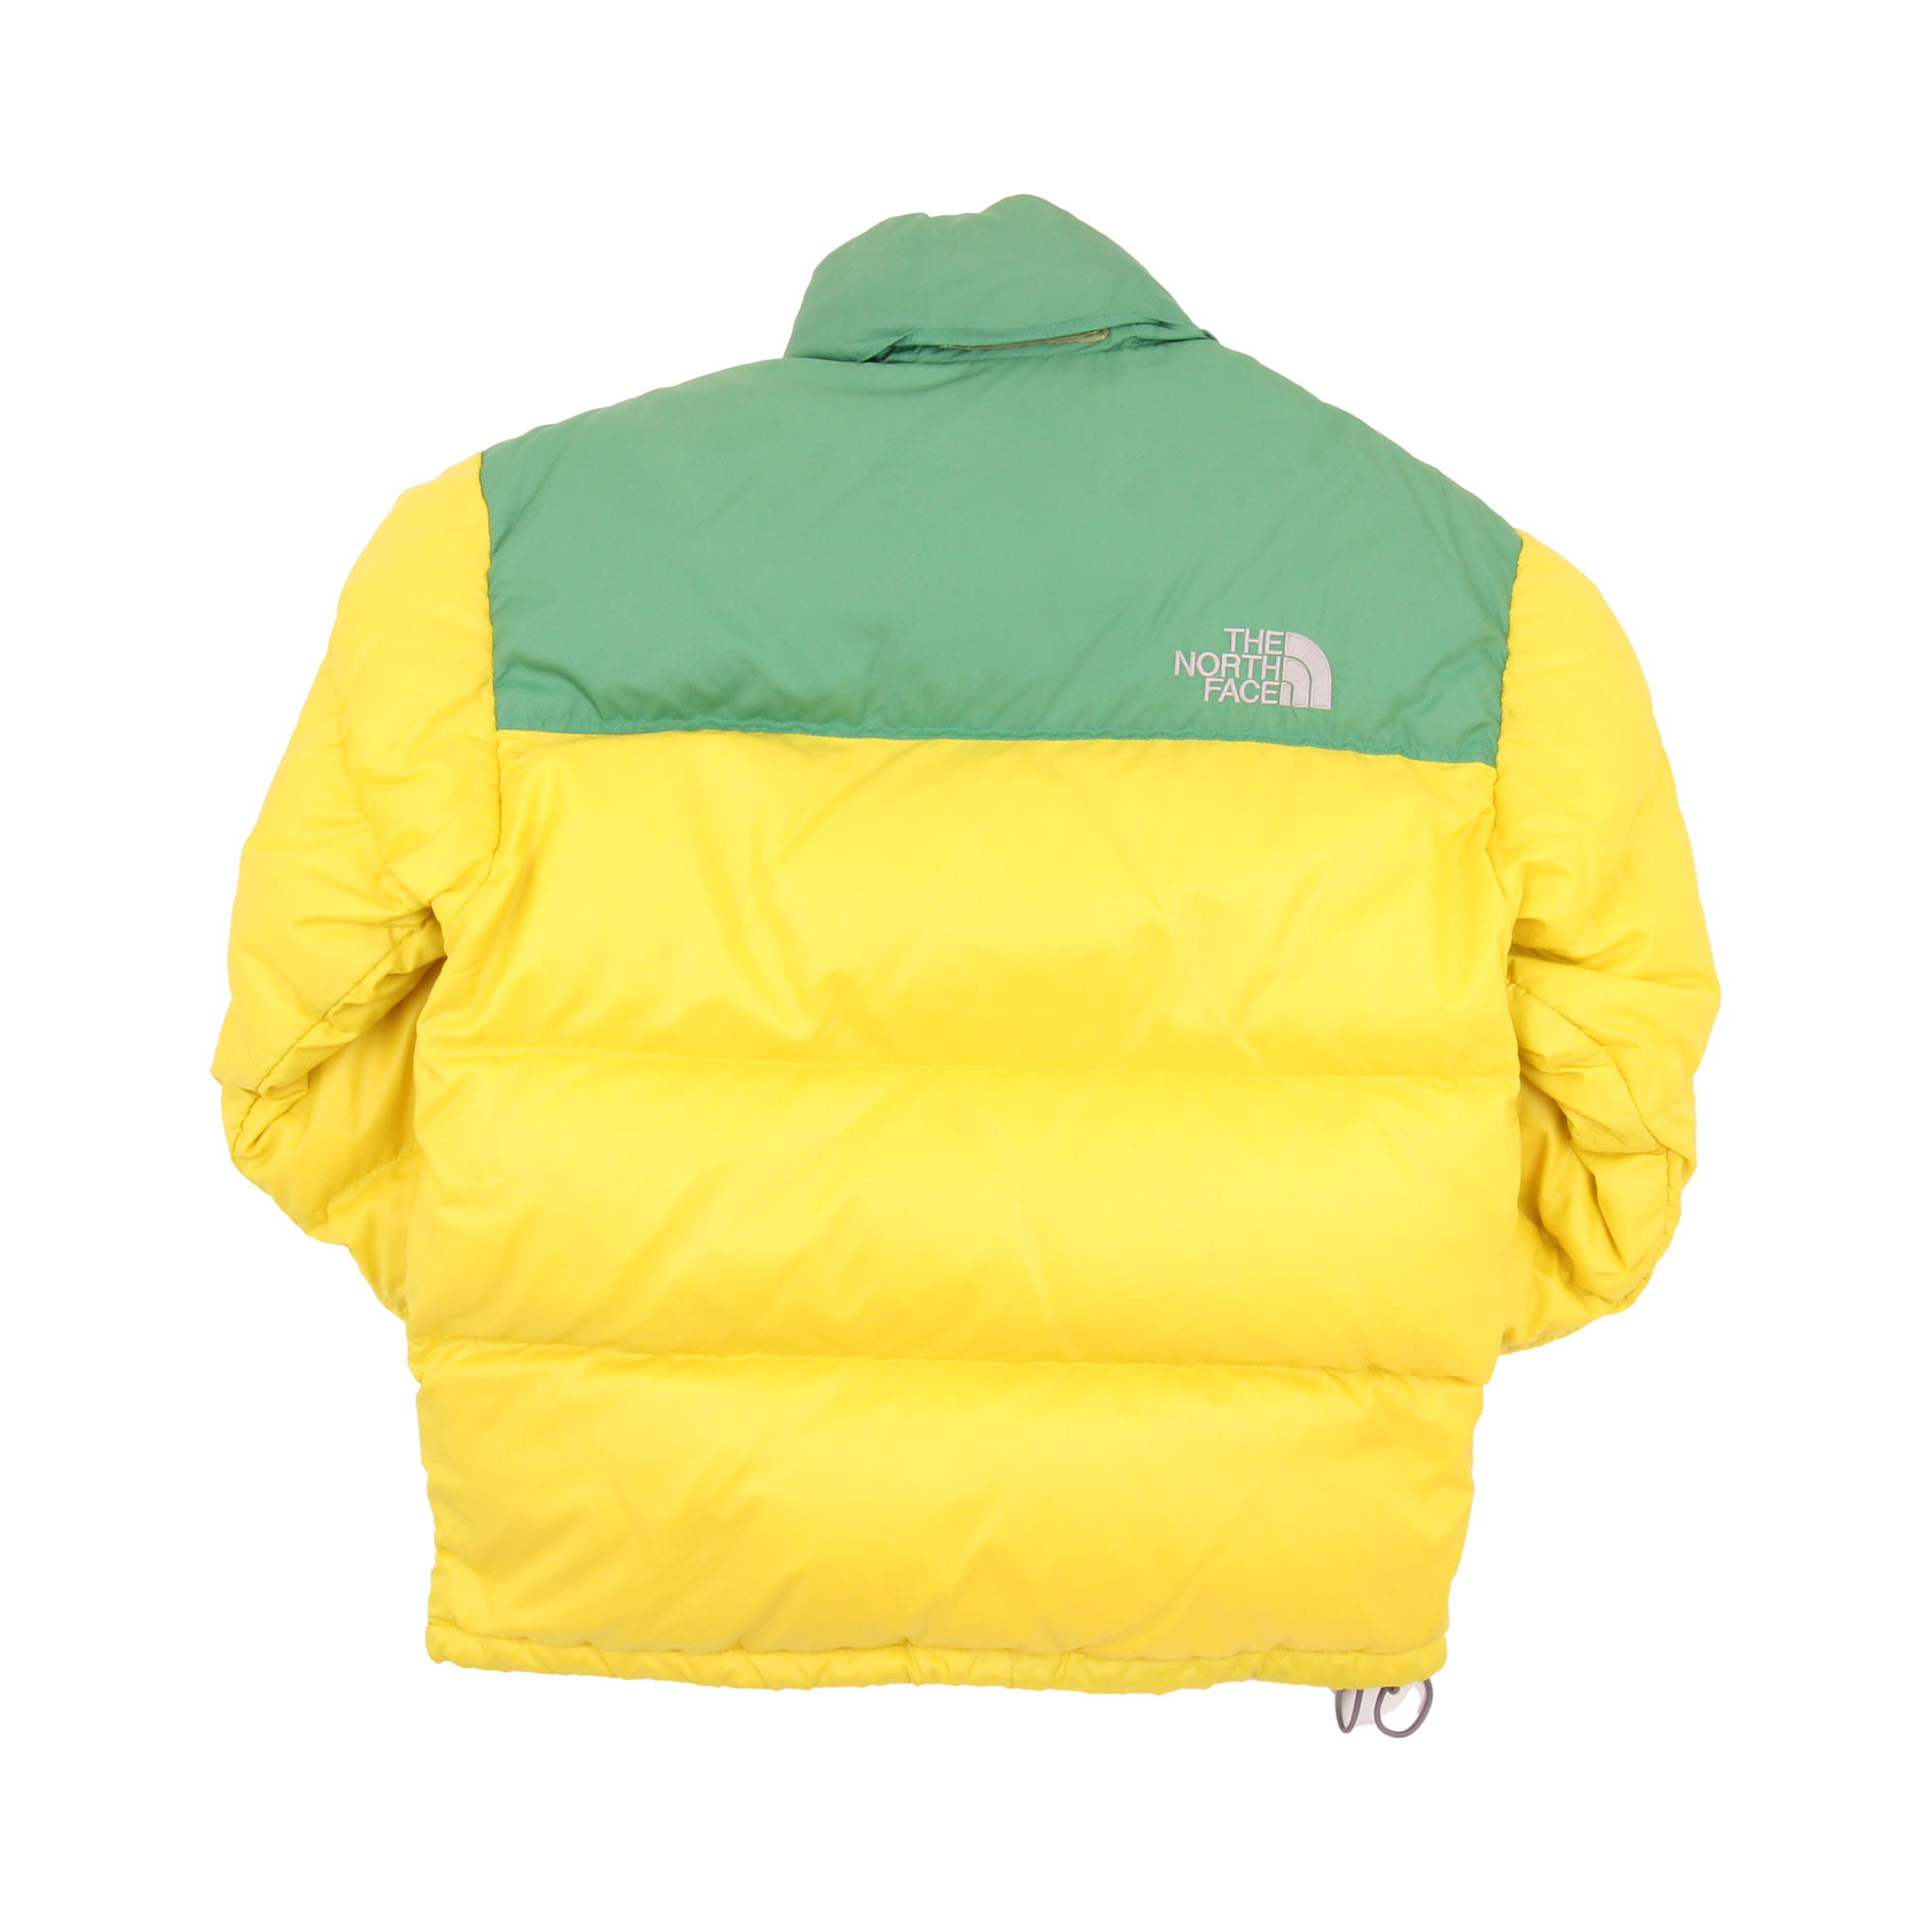 The North Face Colorfull 700 Puffer Jacket -  M